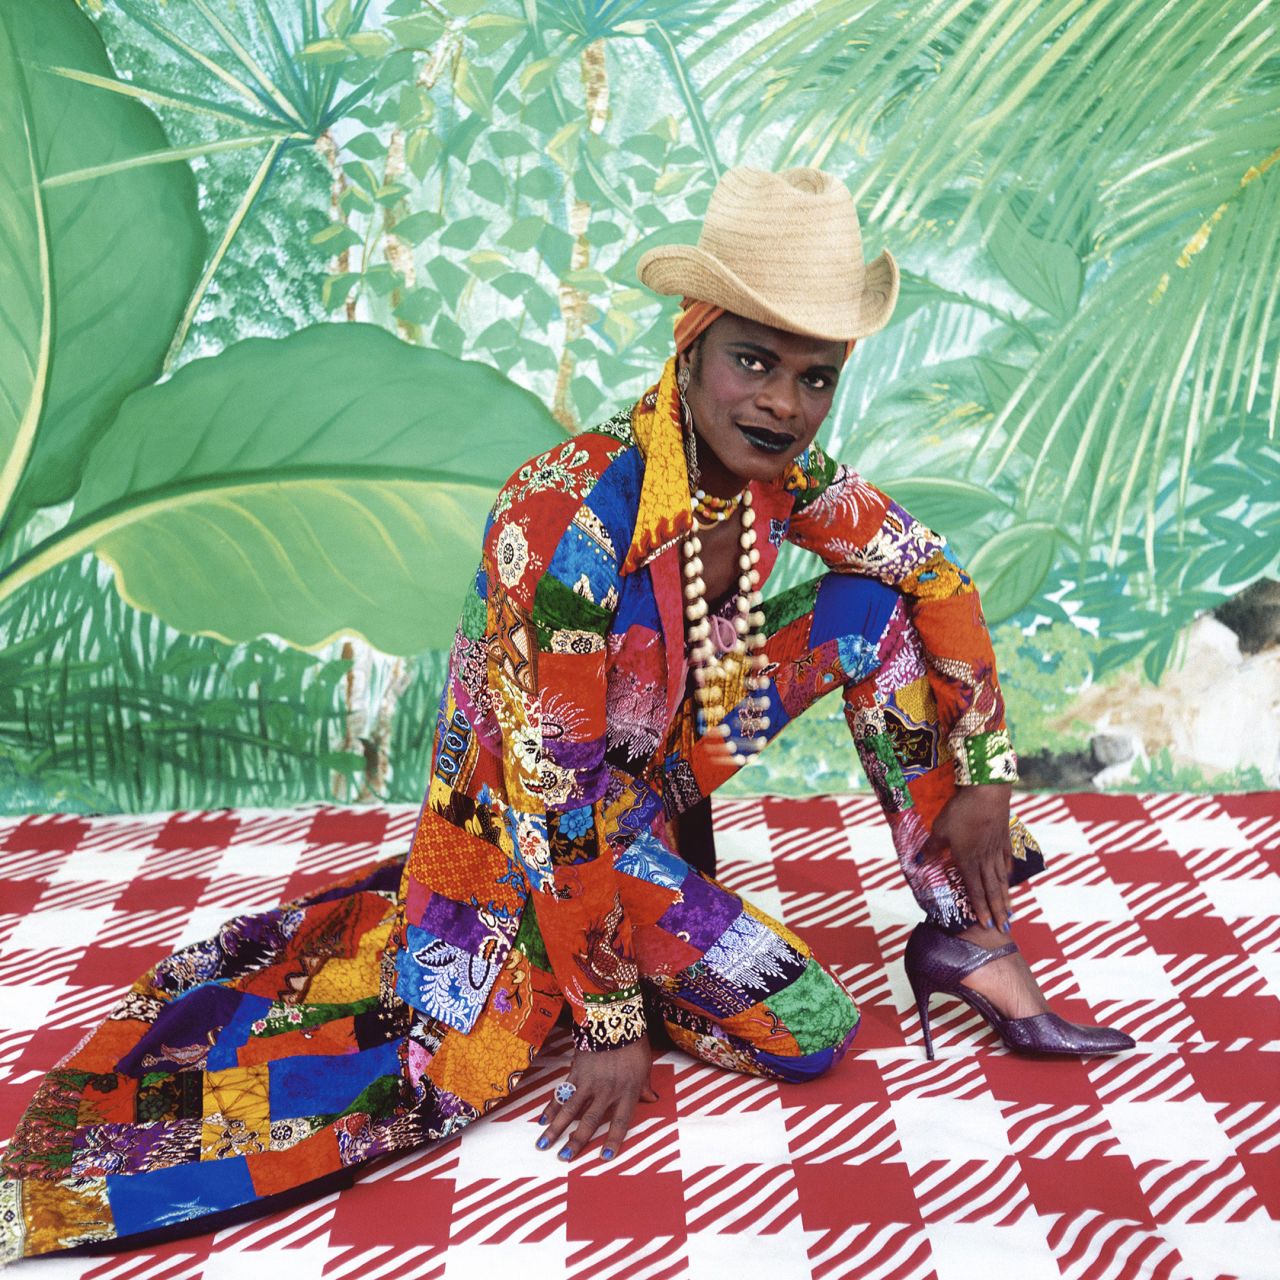 The auction house holds the four highest prices for works by Cameroonian artist Samuel Fosso. In March 2020, "La femme américaine libérée des années 70" (The liberated American woman of the 1970s) sold for £20,000 ($31,000).